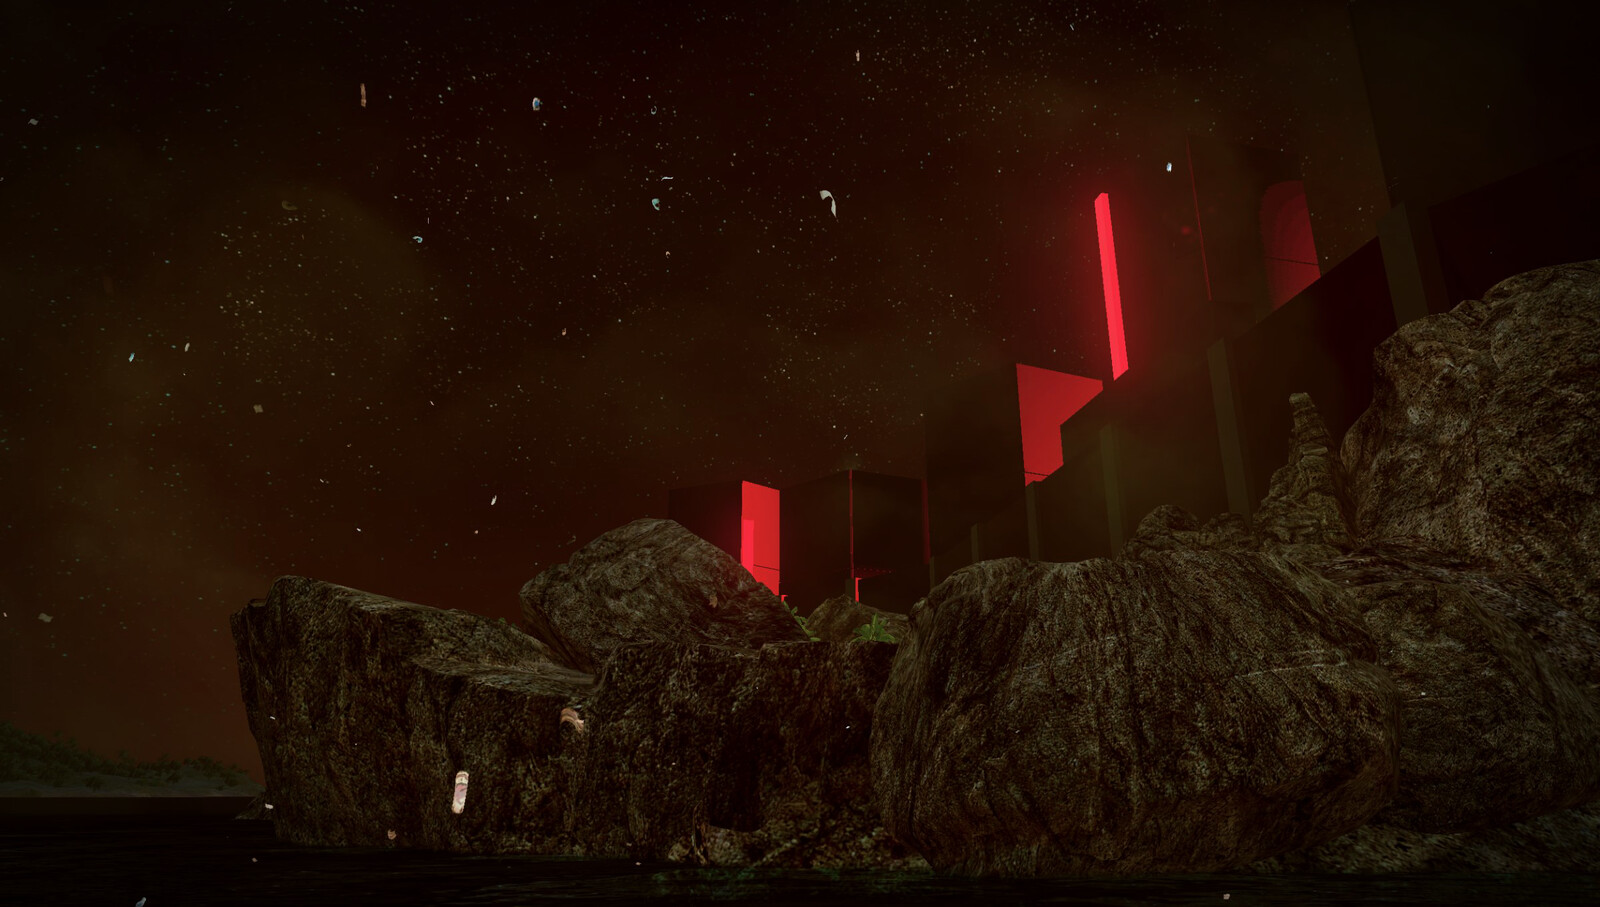 View of 'island' with bar obscured to highlight buildings sticking up over wall

An emmisive red object/light is being used adjacent to the cube-map coordinates to create a red reflection from certain angles.